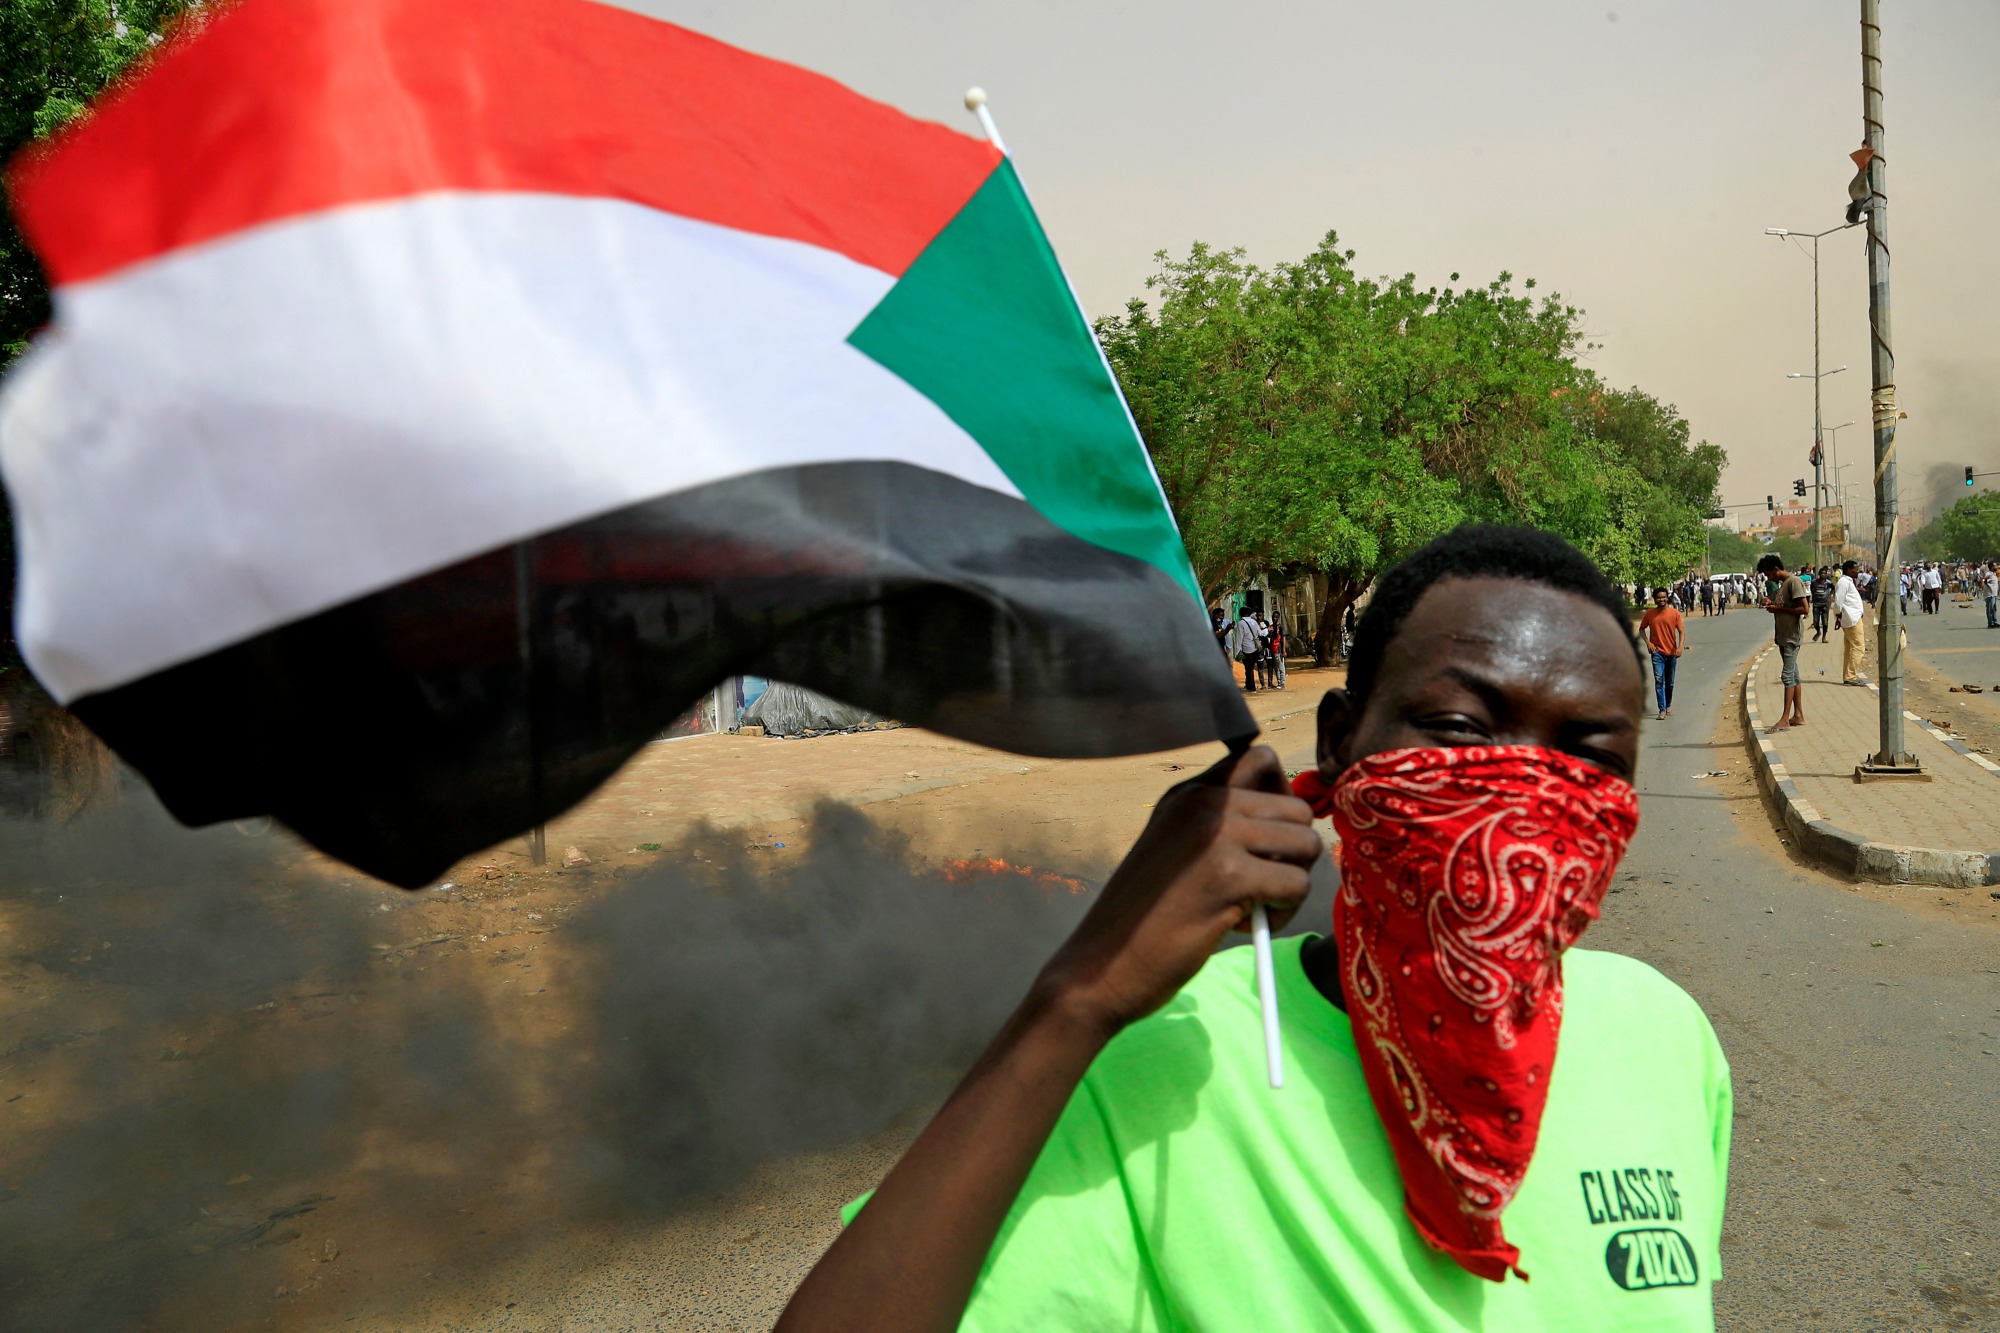 A protester waves a Sudanese flag during a demonstration in the capital Khartoum on 30 June 2021 (AFP)